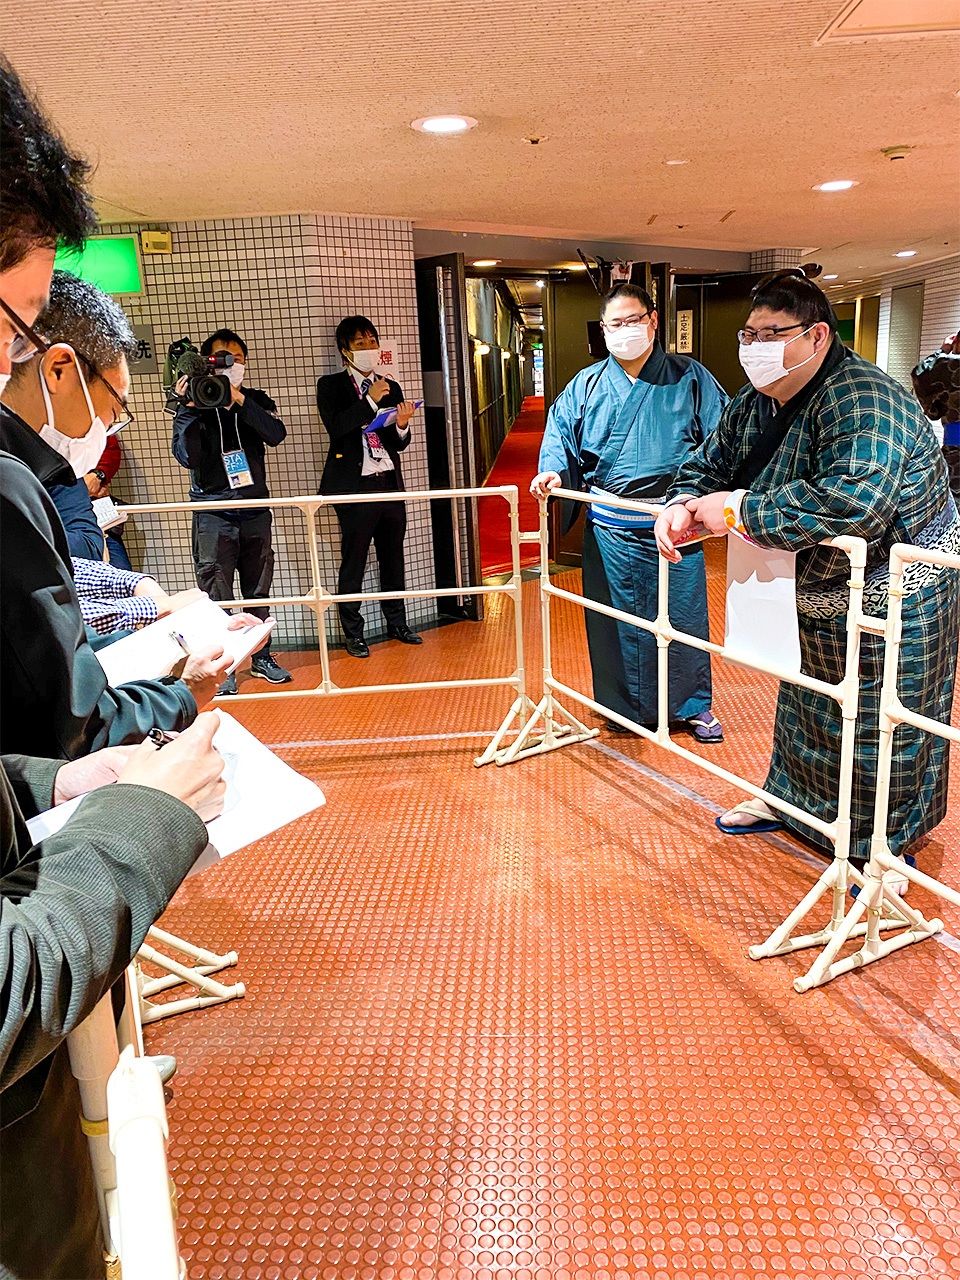 Reporting from the mixed zone at the March 2020 tournament. (© Nagayama Satoshi) 